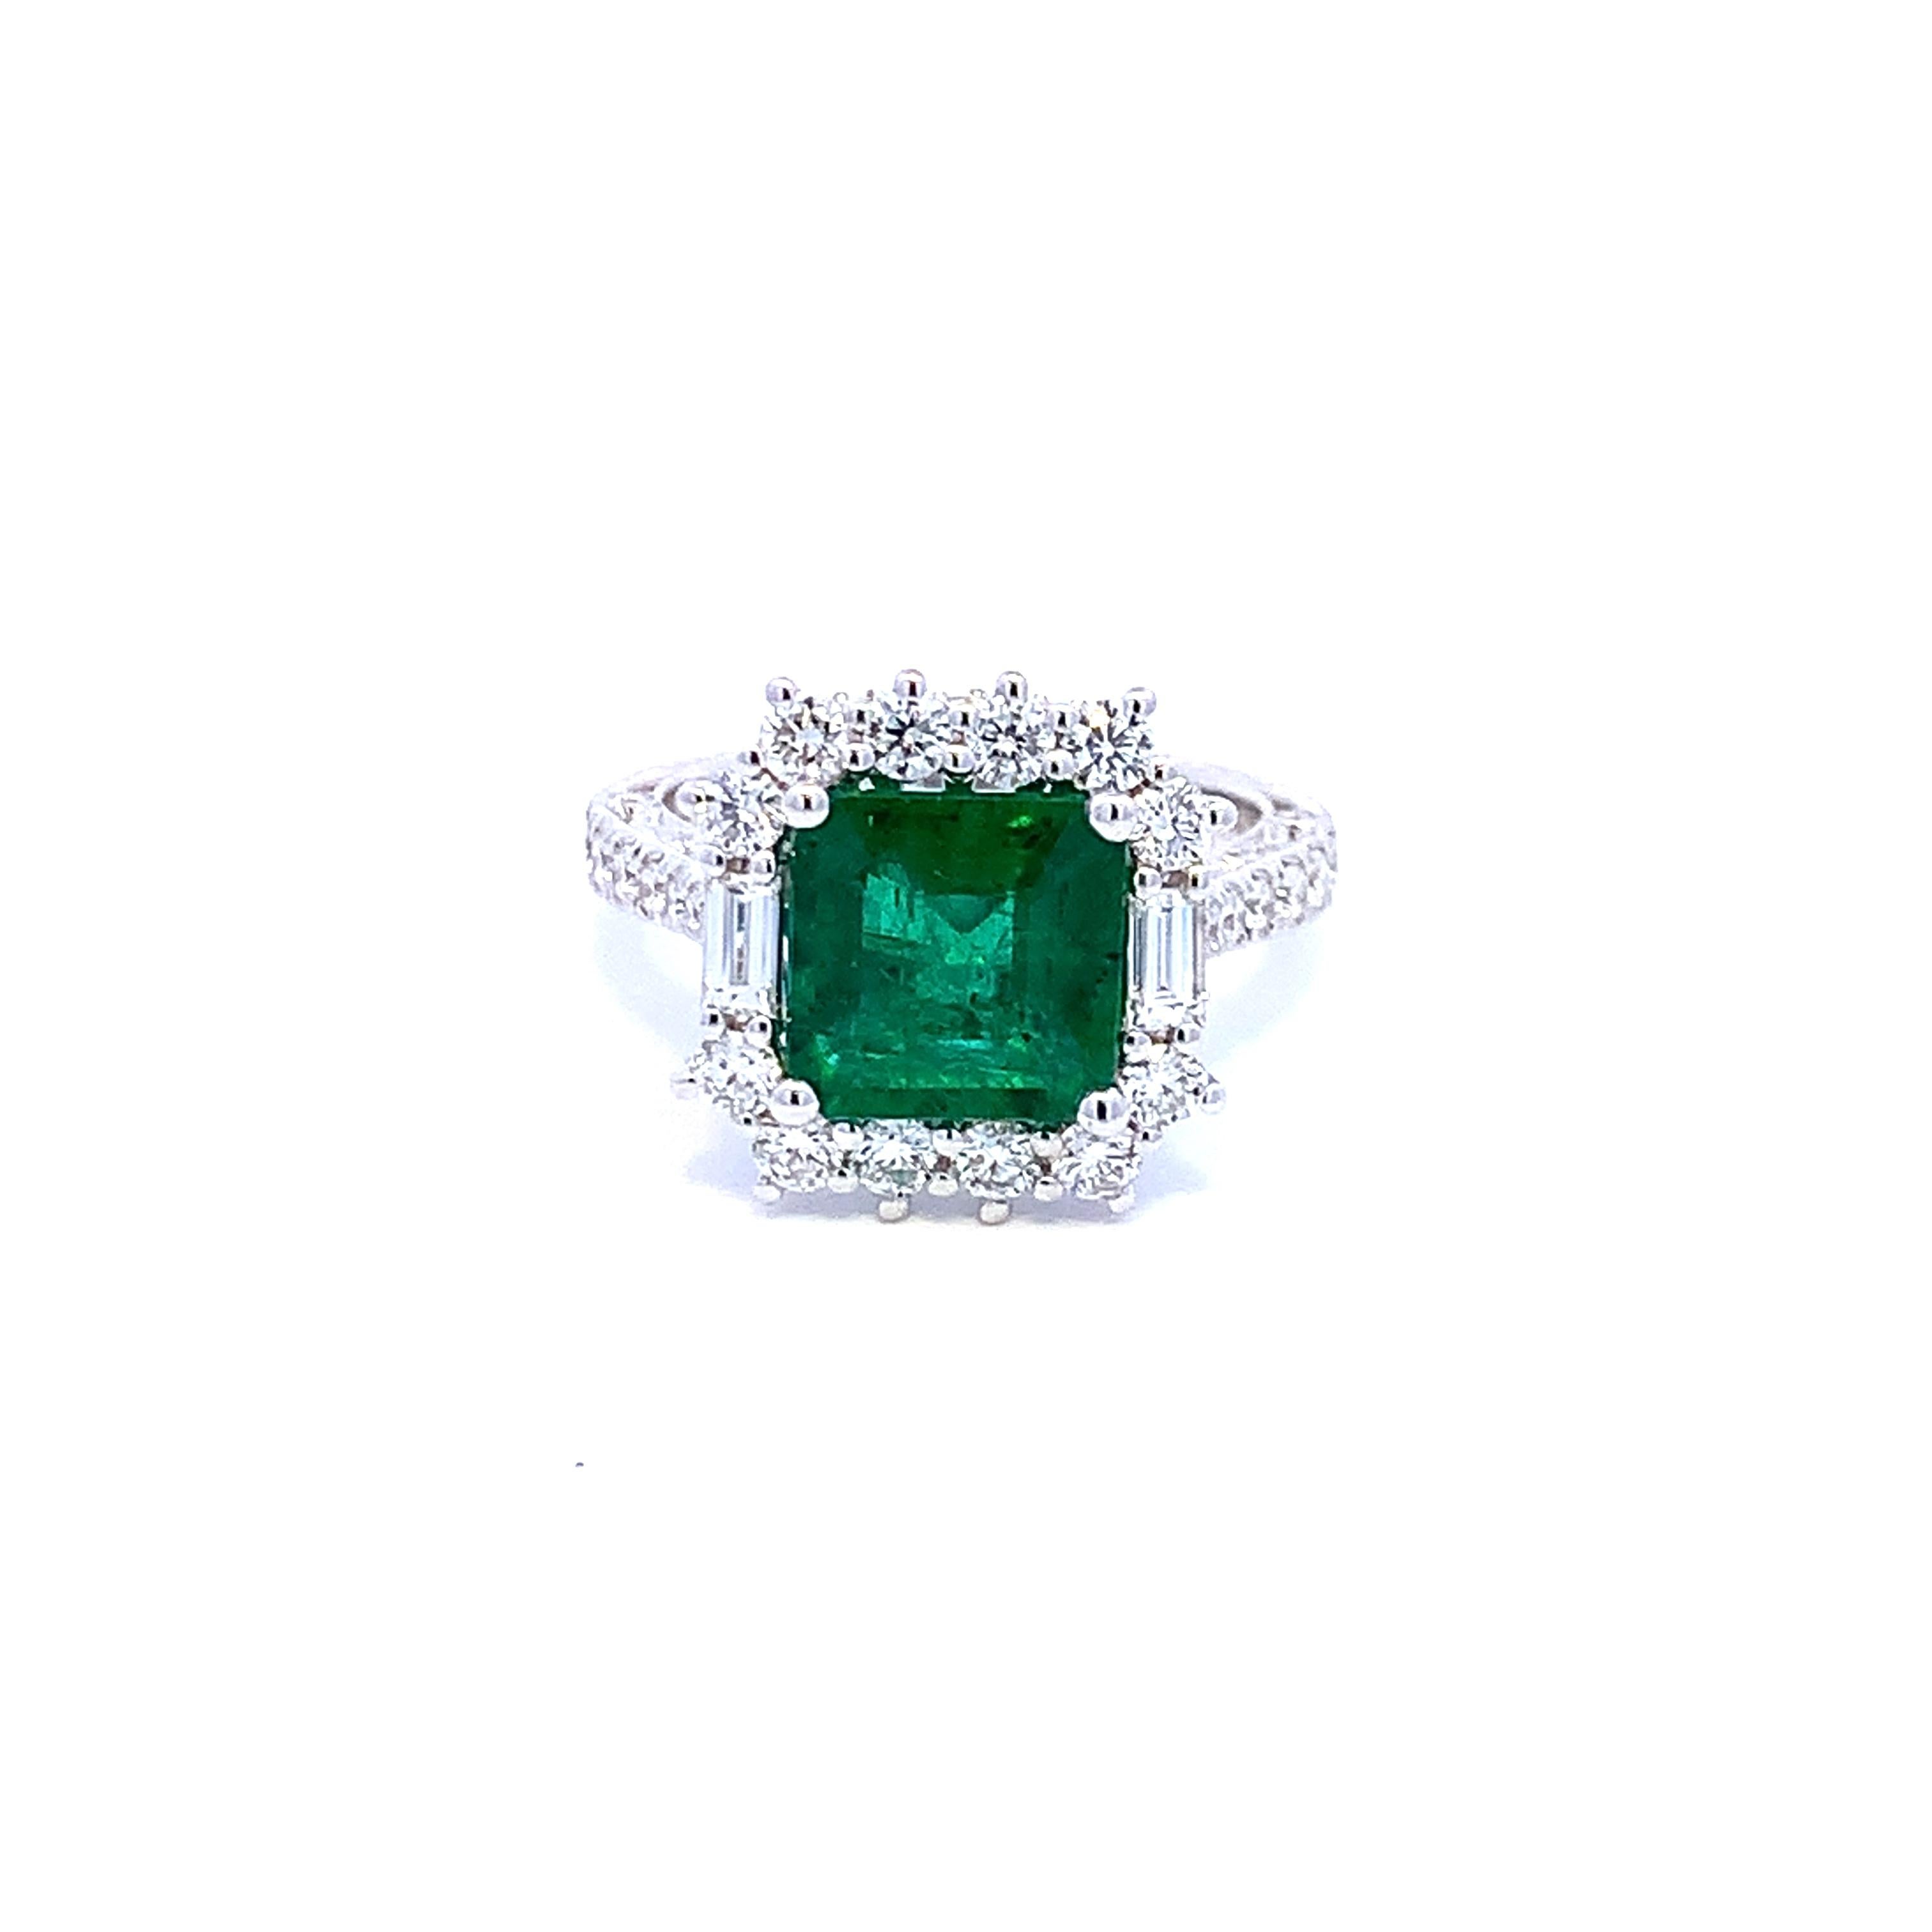 Beautiful Fashion Ring With Two Diamond Baguettes, Square Emerald Cut Emerald, and Round Diamonds

Emerald - 2.80ct
Diamonds - 1.30ct
Ring Metal - 18k White Gold